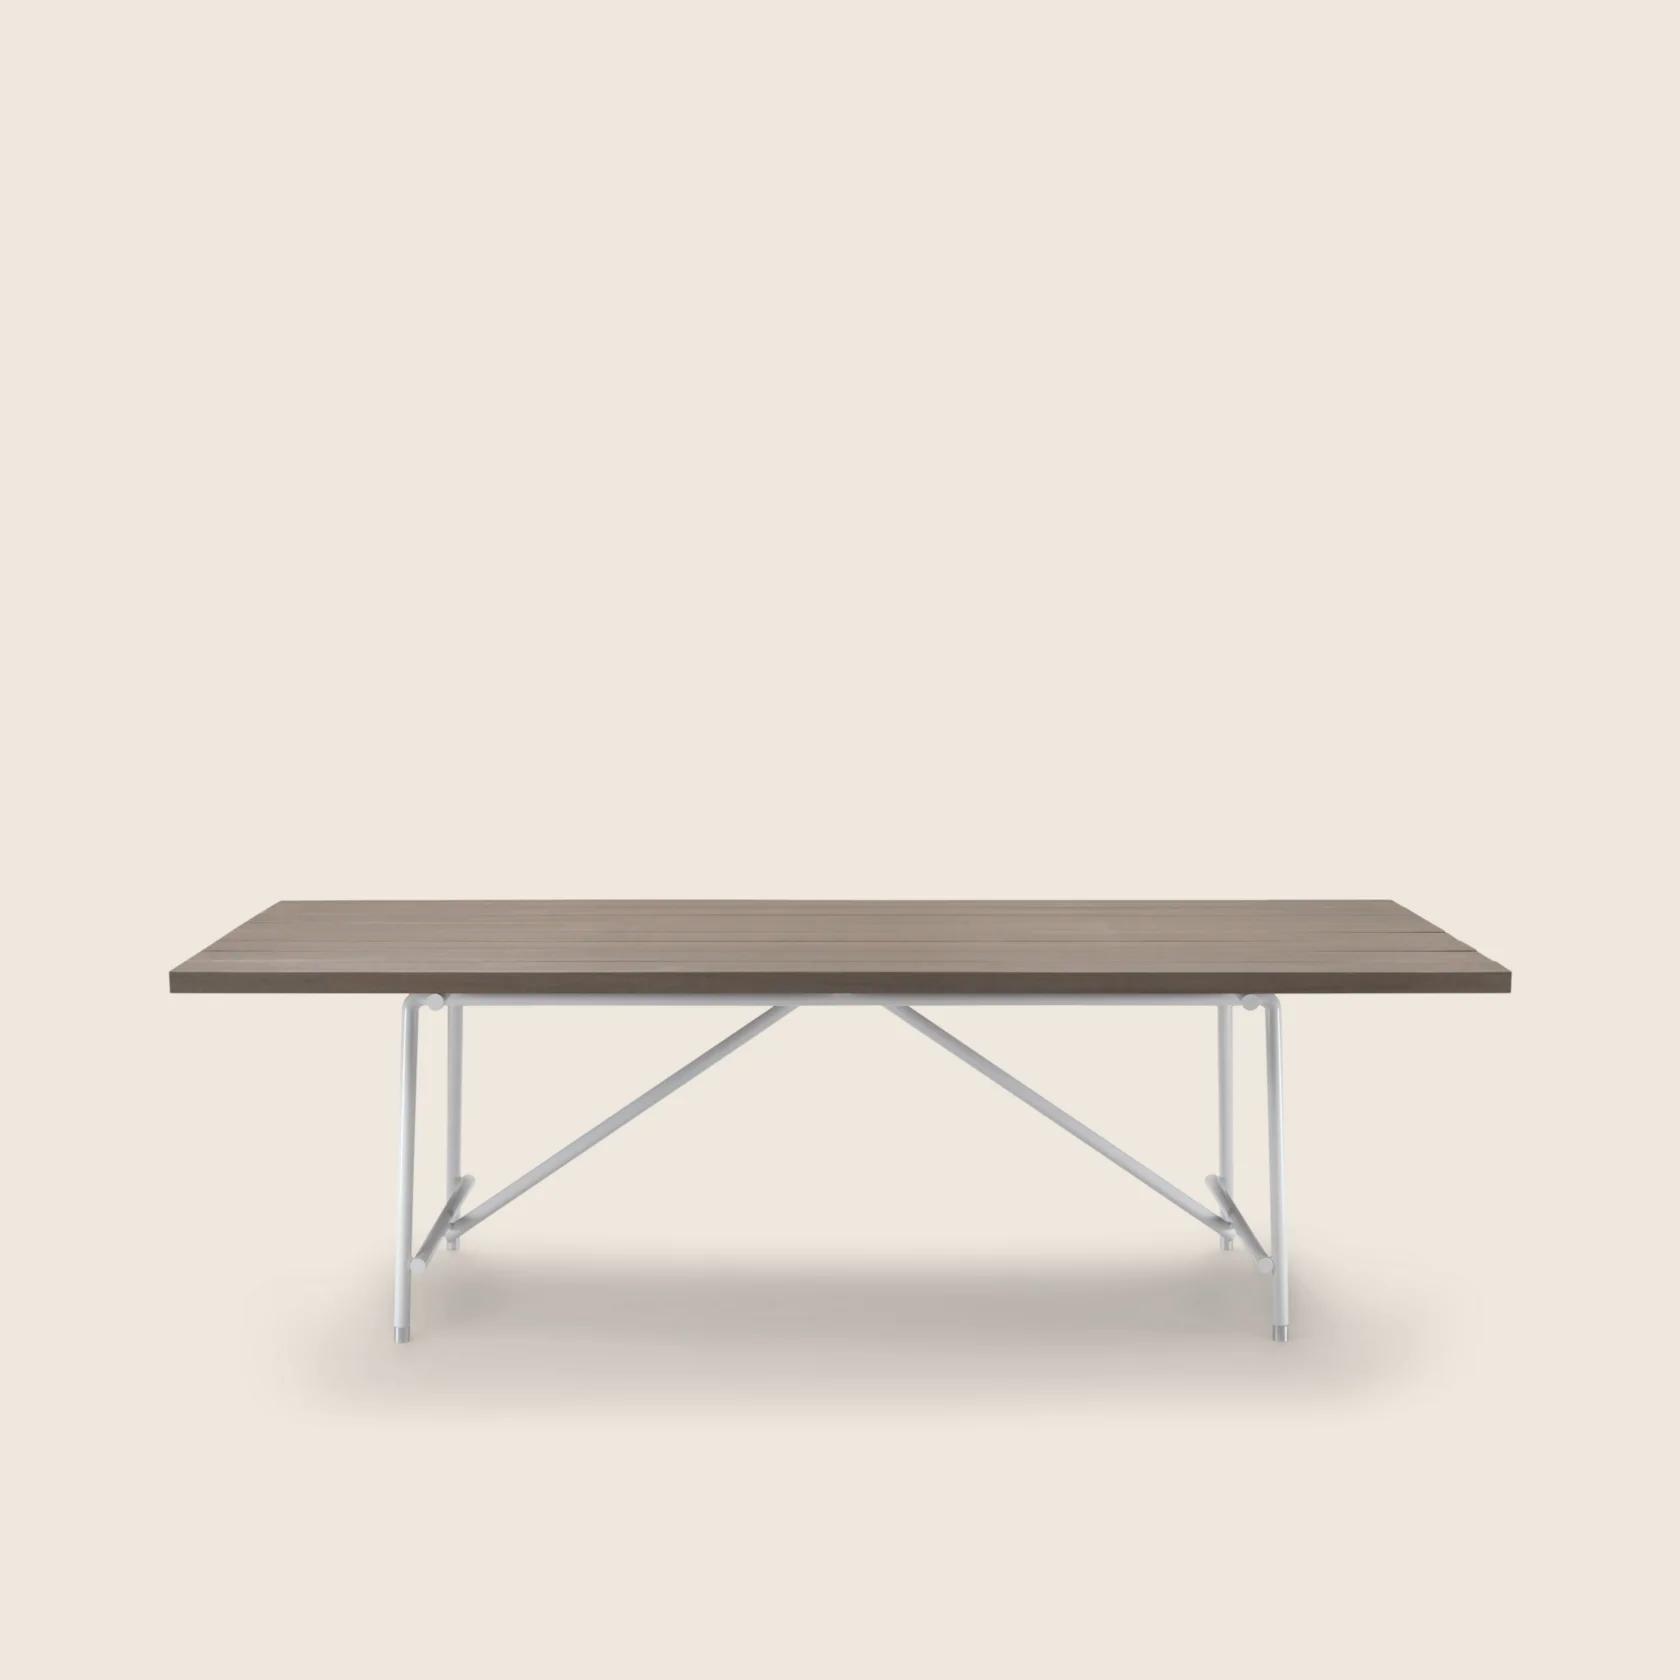 0282L0_ANY DAY OUTDOOR_TABLE_01.png